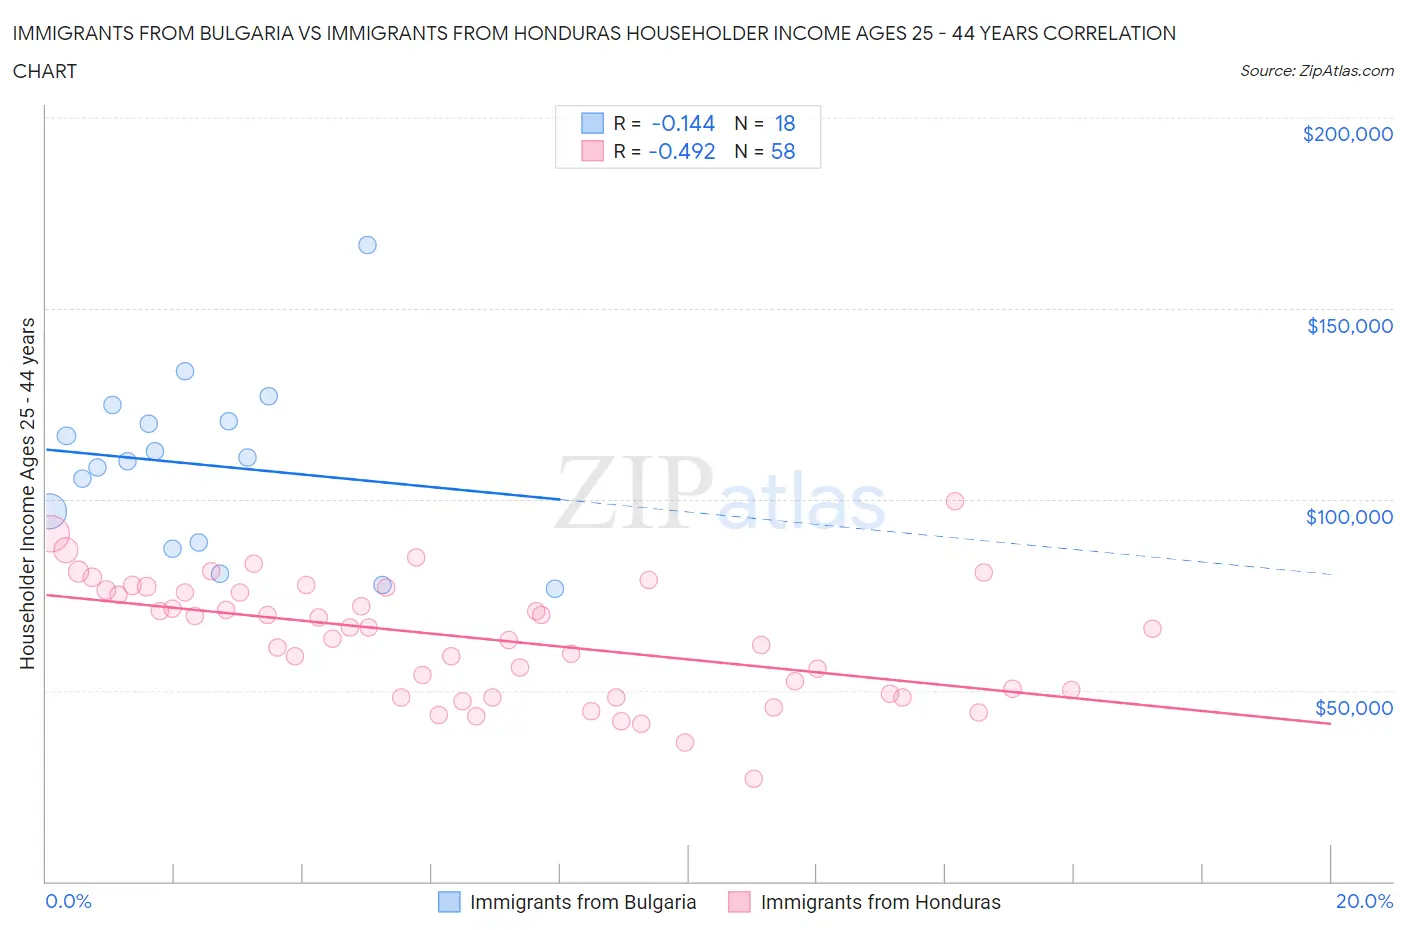 Immigrants from Bulgaria vs Immigrants from Honduras Householder Income Ages 25 - 44 years